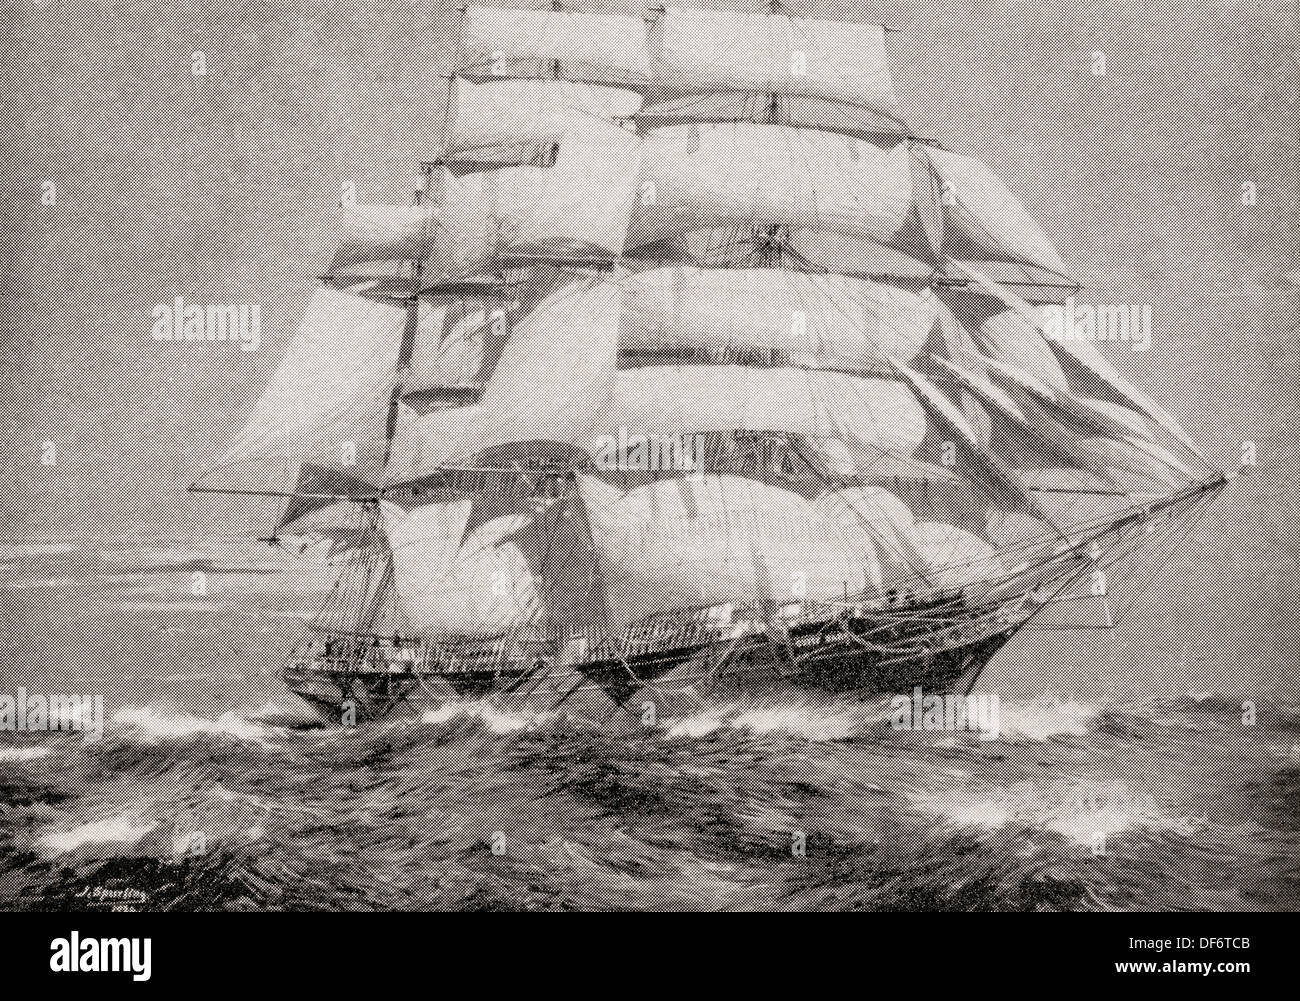 The British clipper ship, Cutty Sark. From The Romance of the Merchant Ship, published 1931. Stock Photo